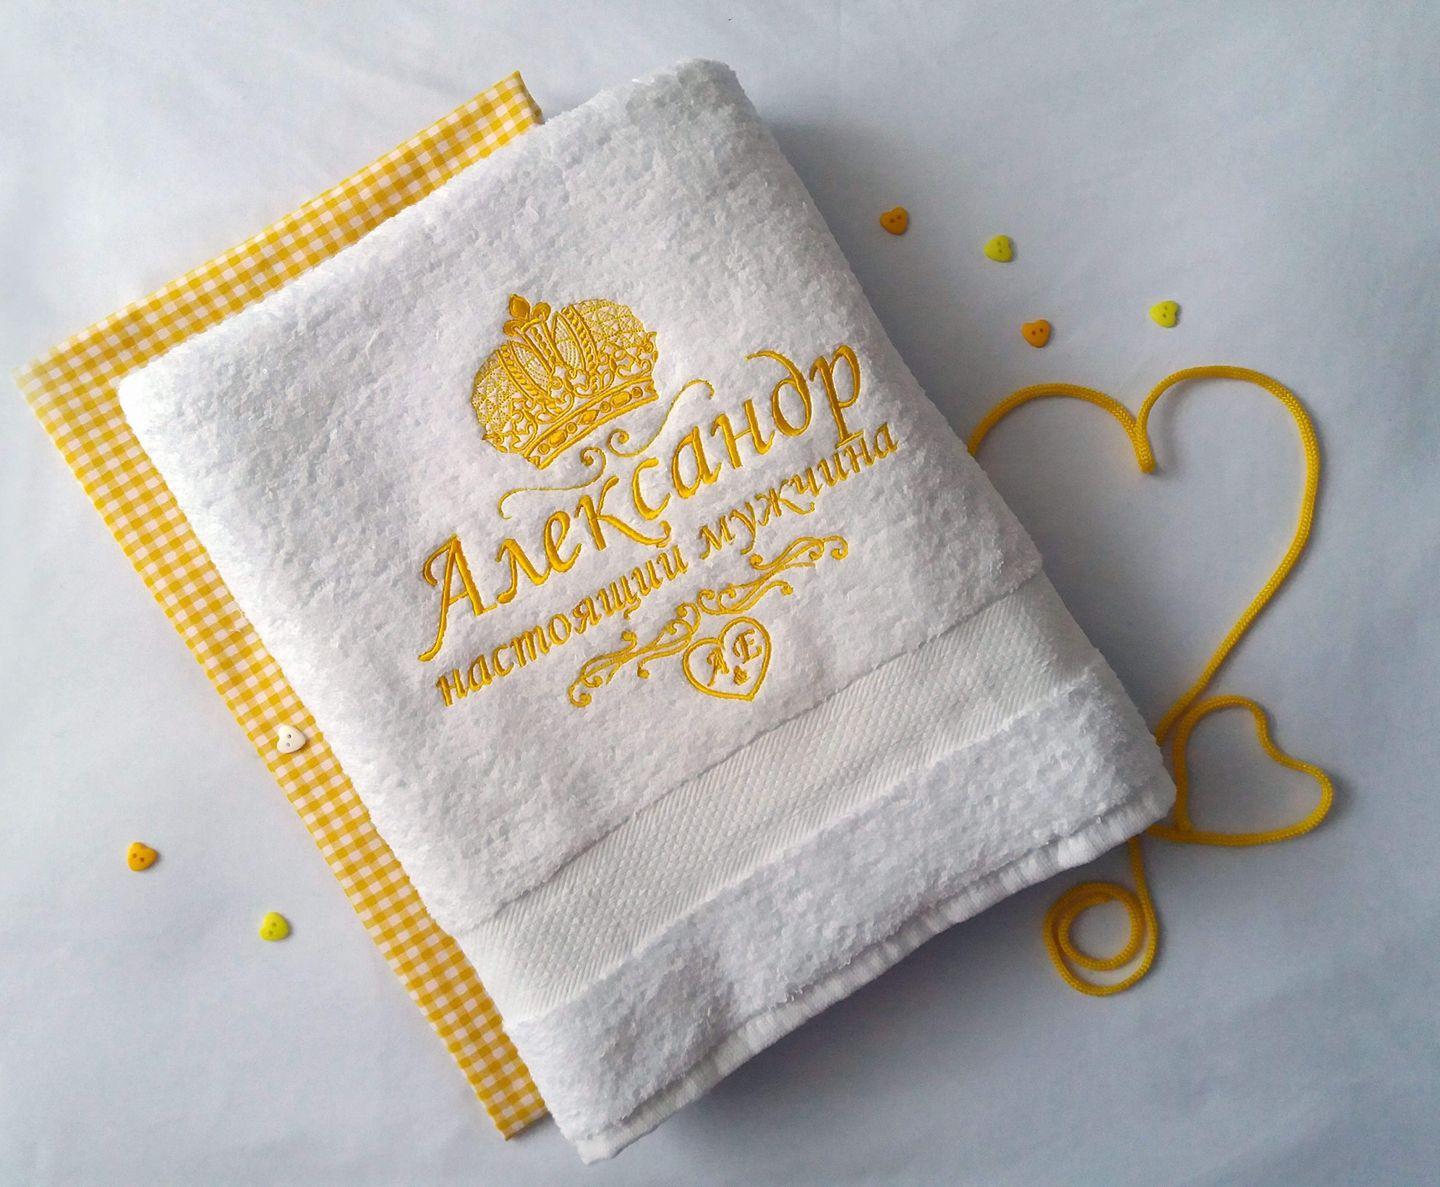 Embroidered towel with golden crown design